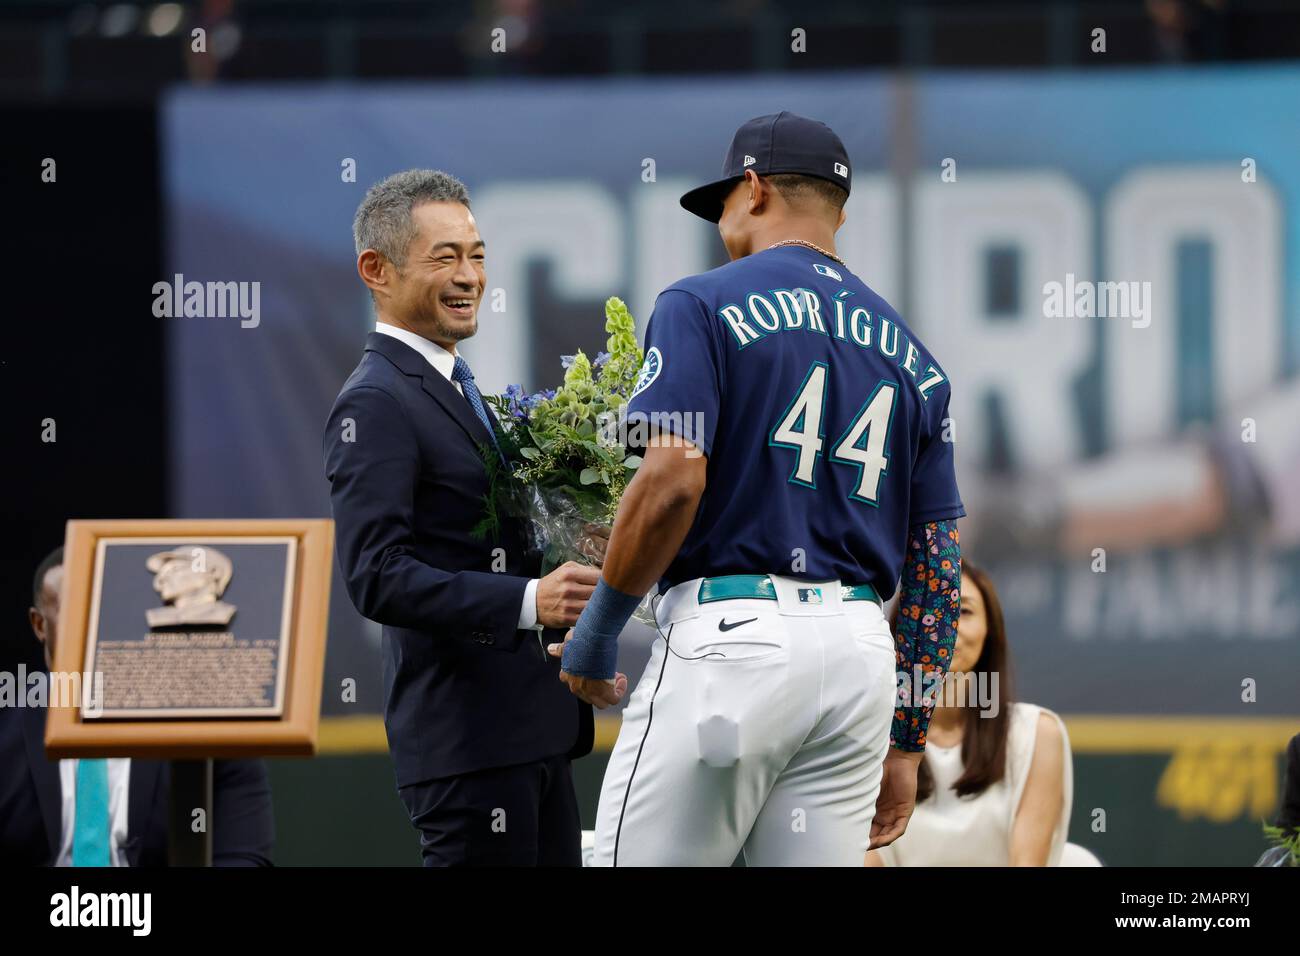 Former Seattle Mariners player Ichiro Suzuki, left, is presented with a  bouquet of flowers by Mariners' Julio Rodriguez as he is inducted into the Mariners  Hall of Fame during a ceremony before